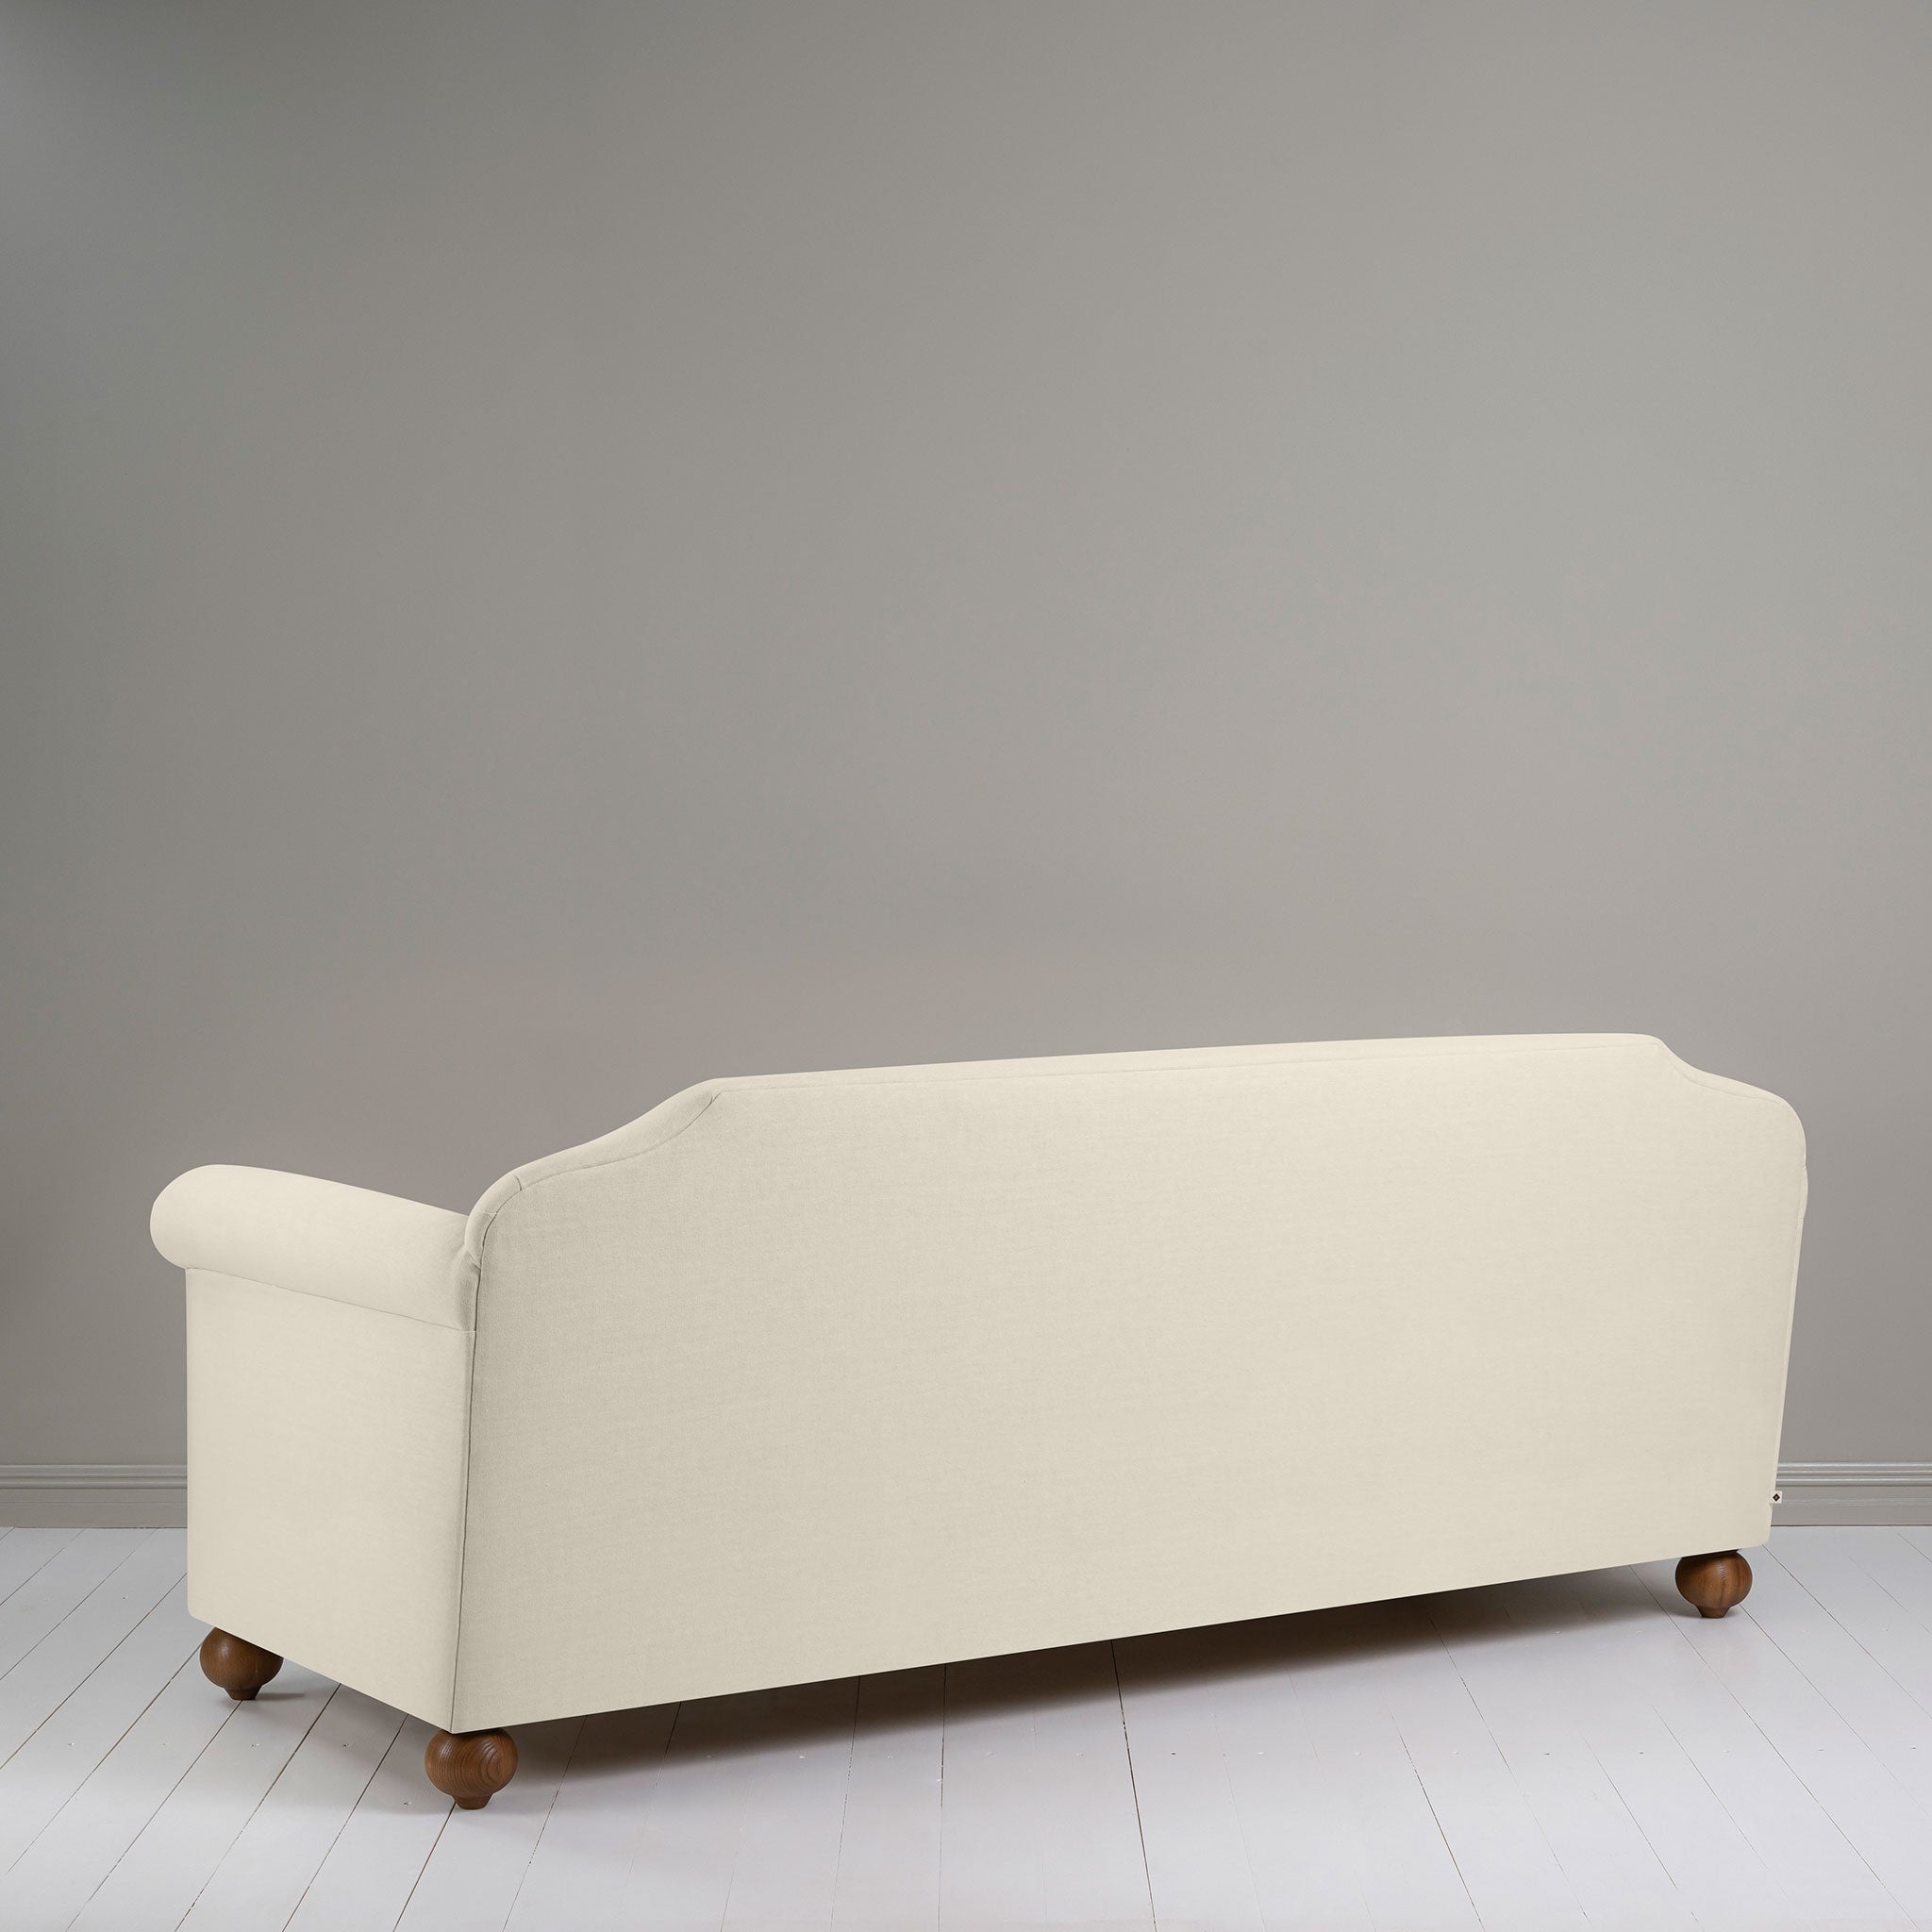  Dolittle 4 seater sofa in Laidback Linen Dove 